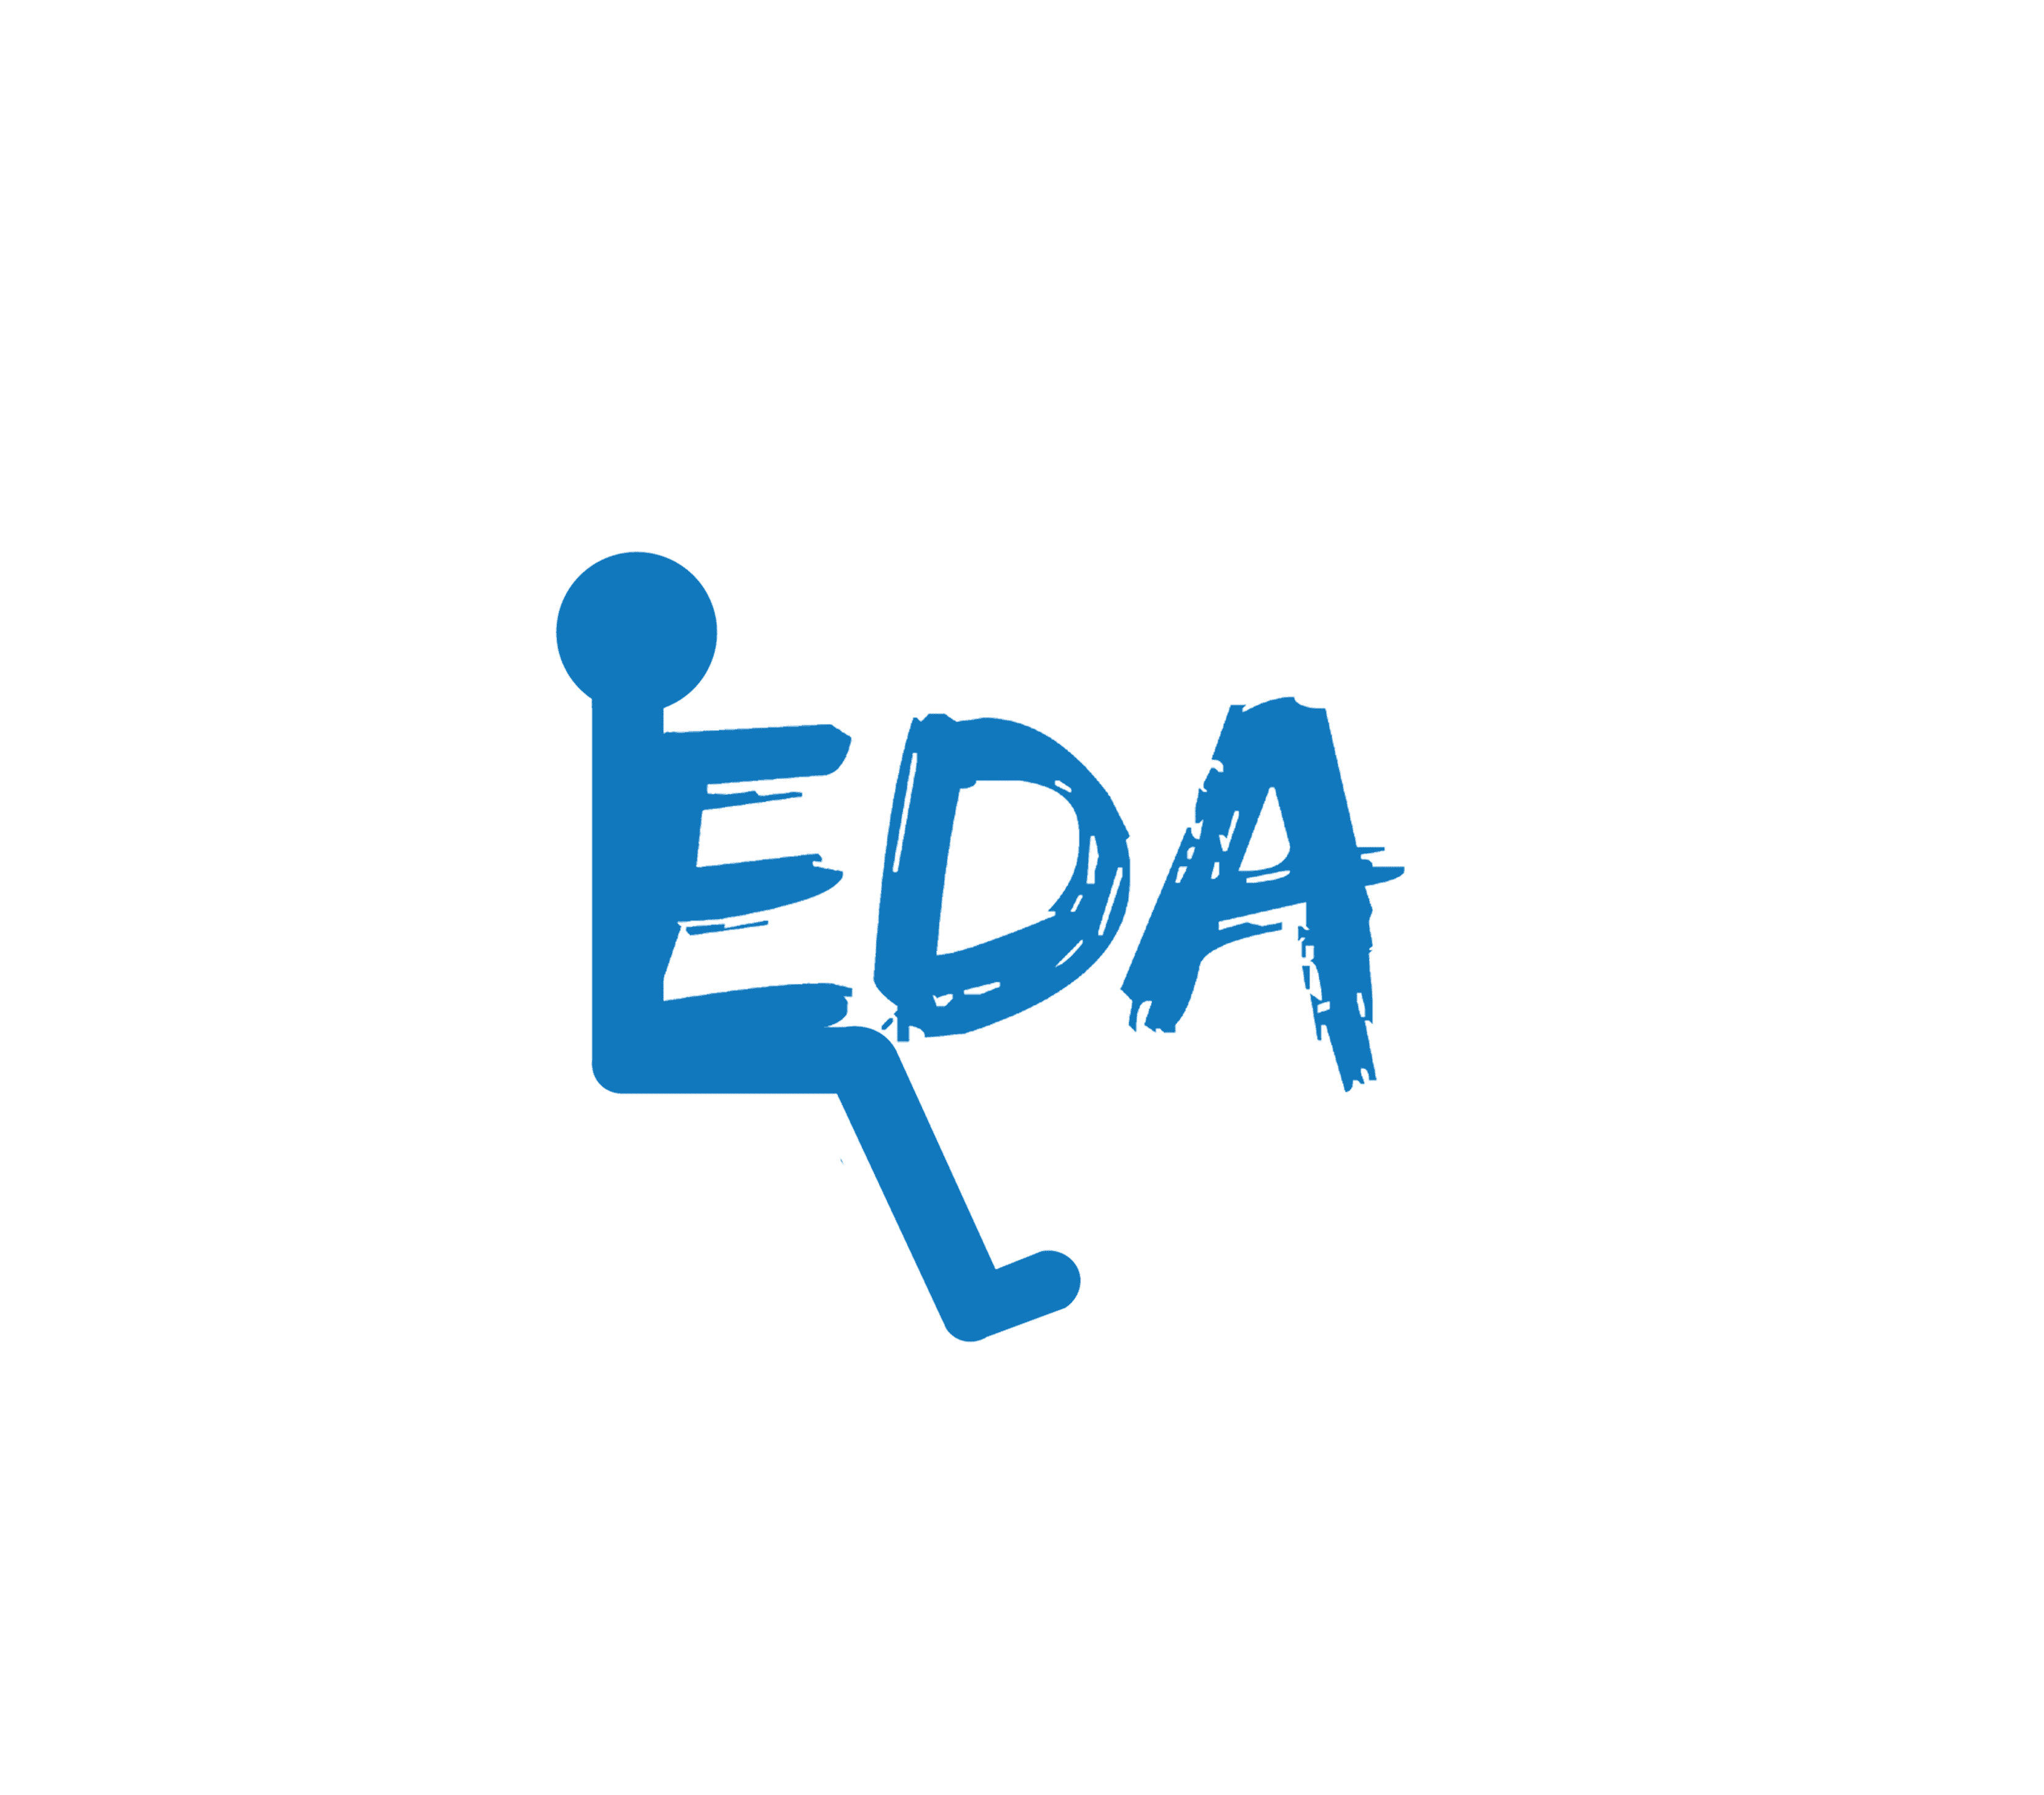 Enable the Disable Action (EDA) logo